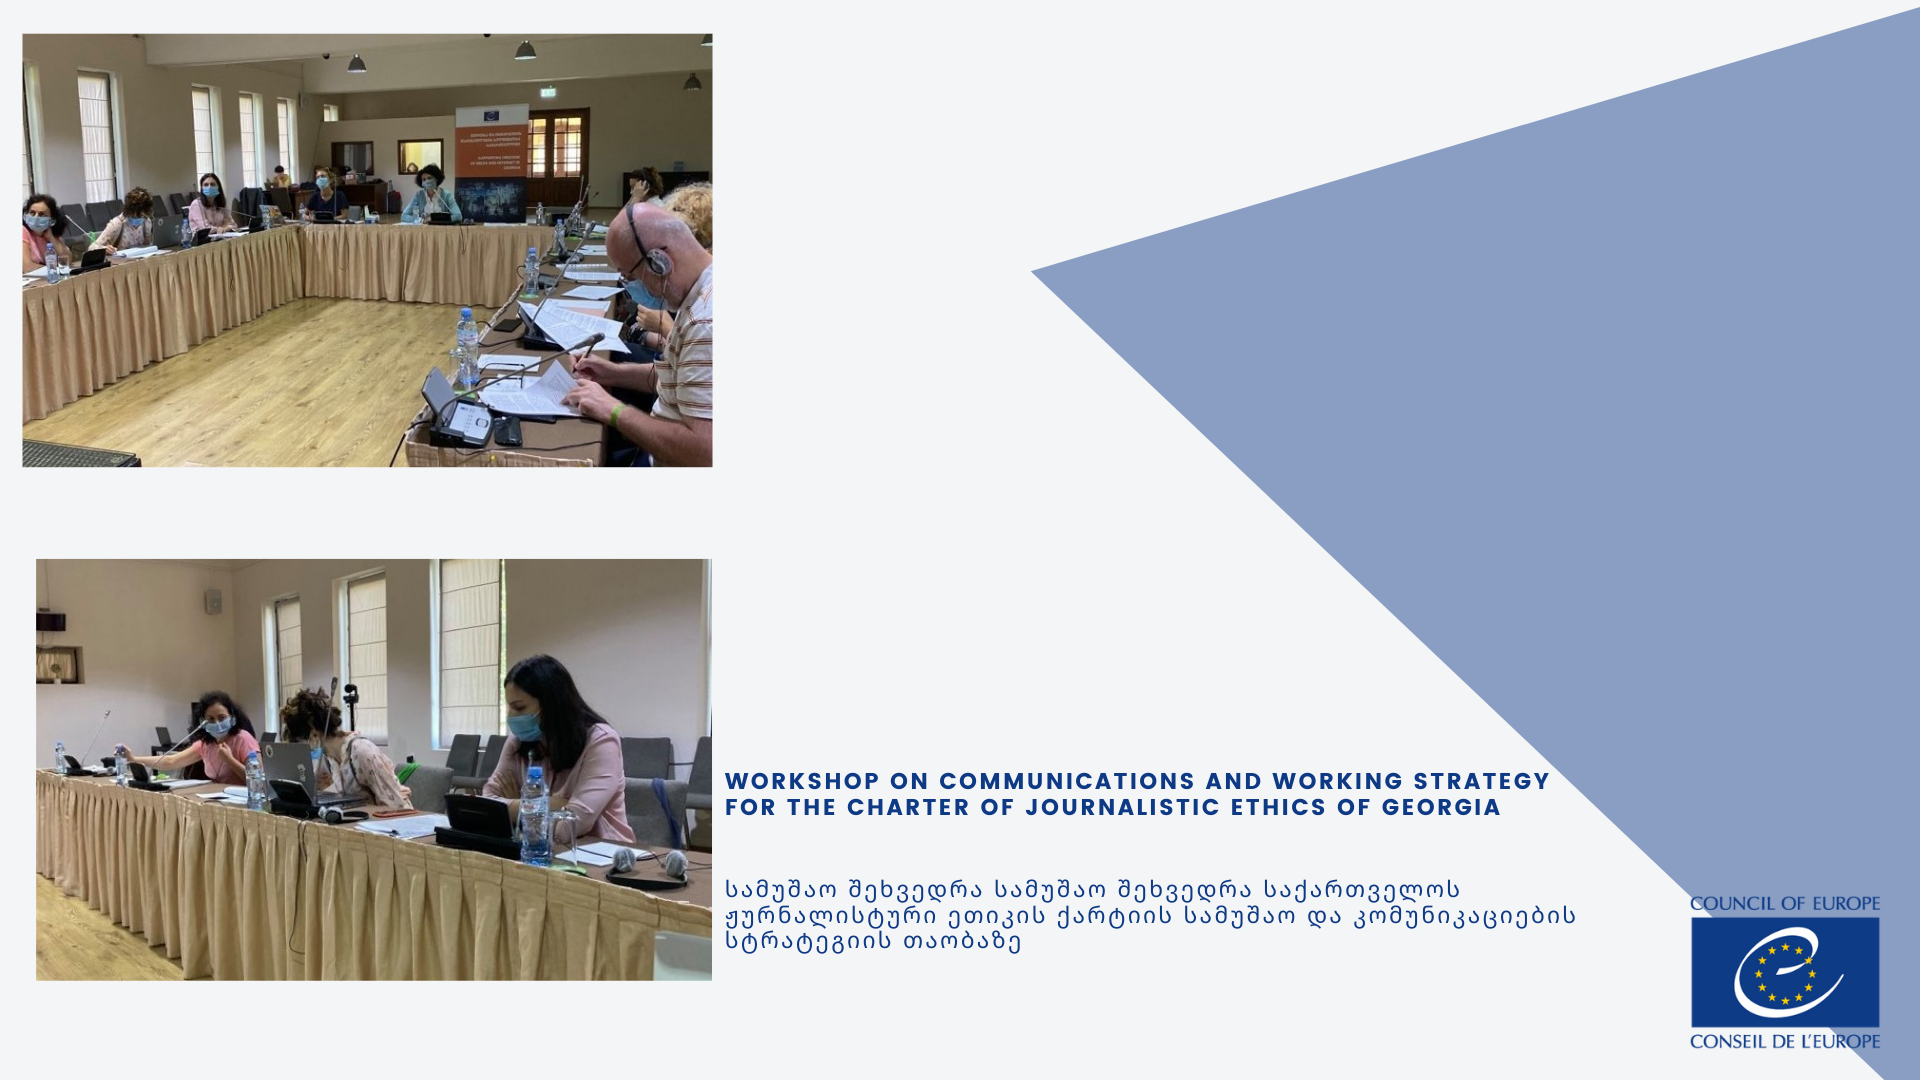 Workshop on Communications and Working Strategy for the Charter of Journalistic Ethics of Georgia